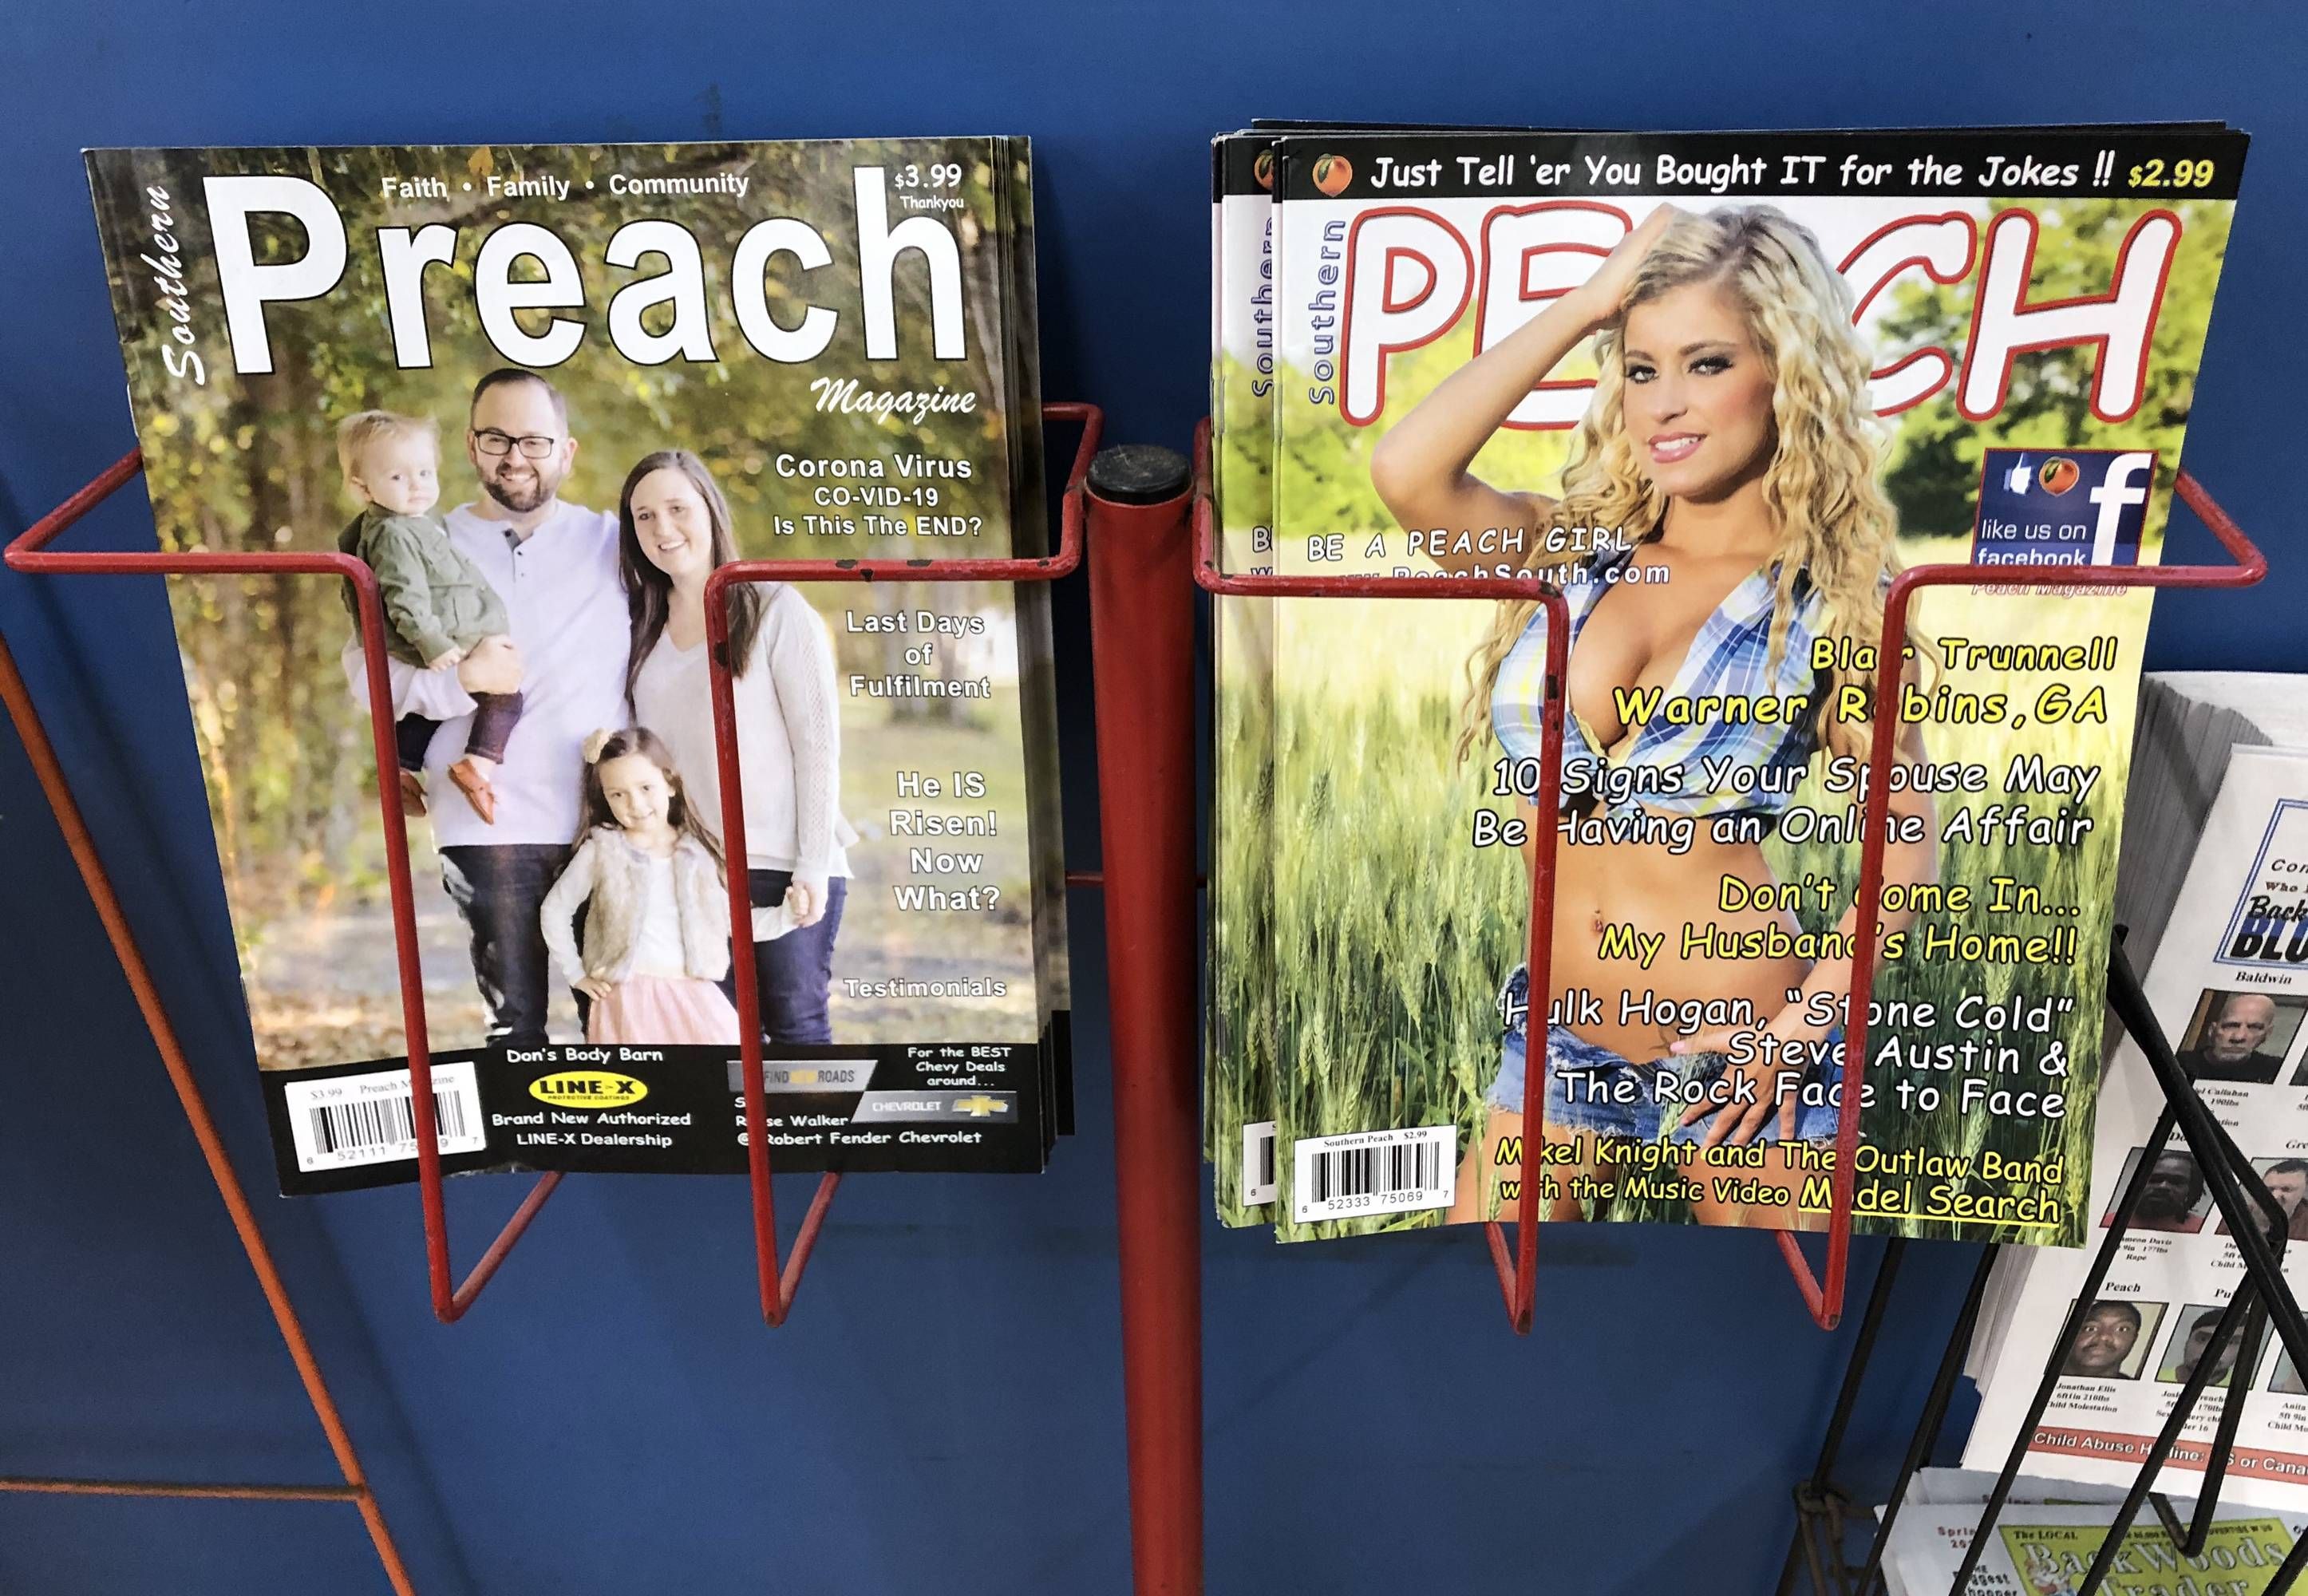 This magazine rack certainly sums up Georgia!